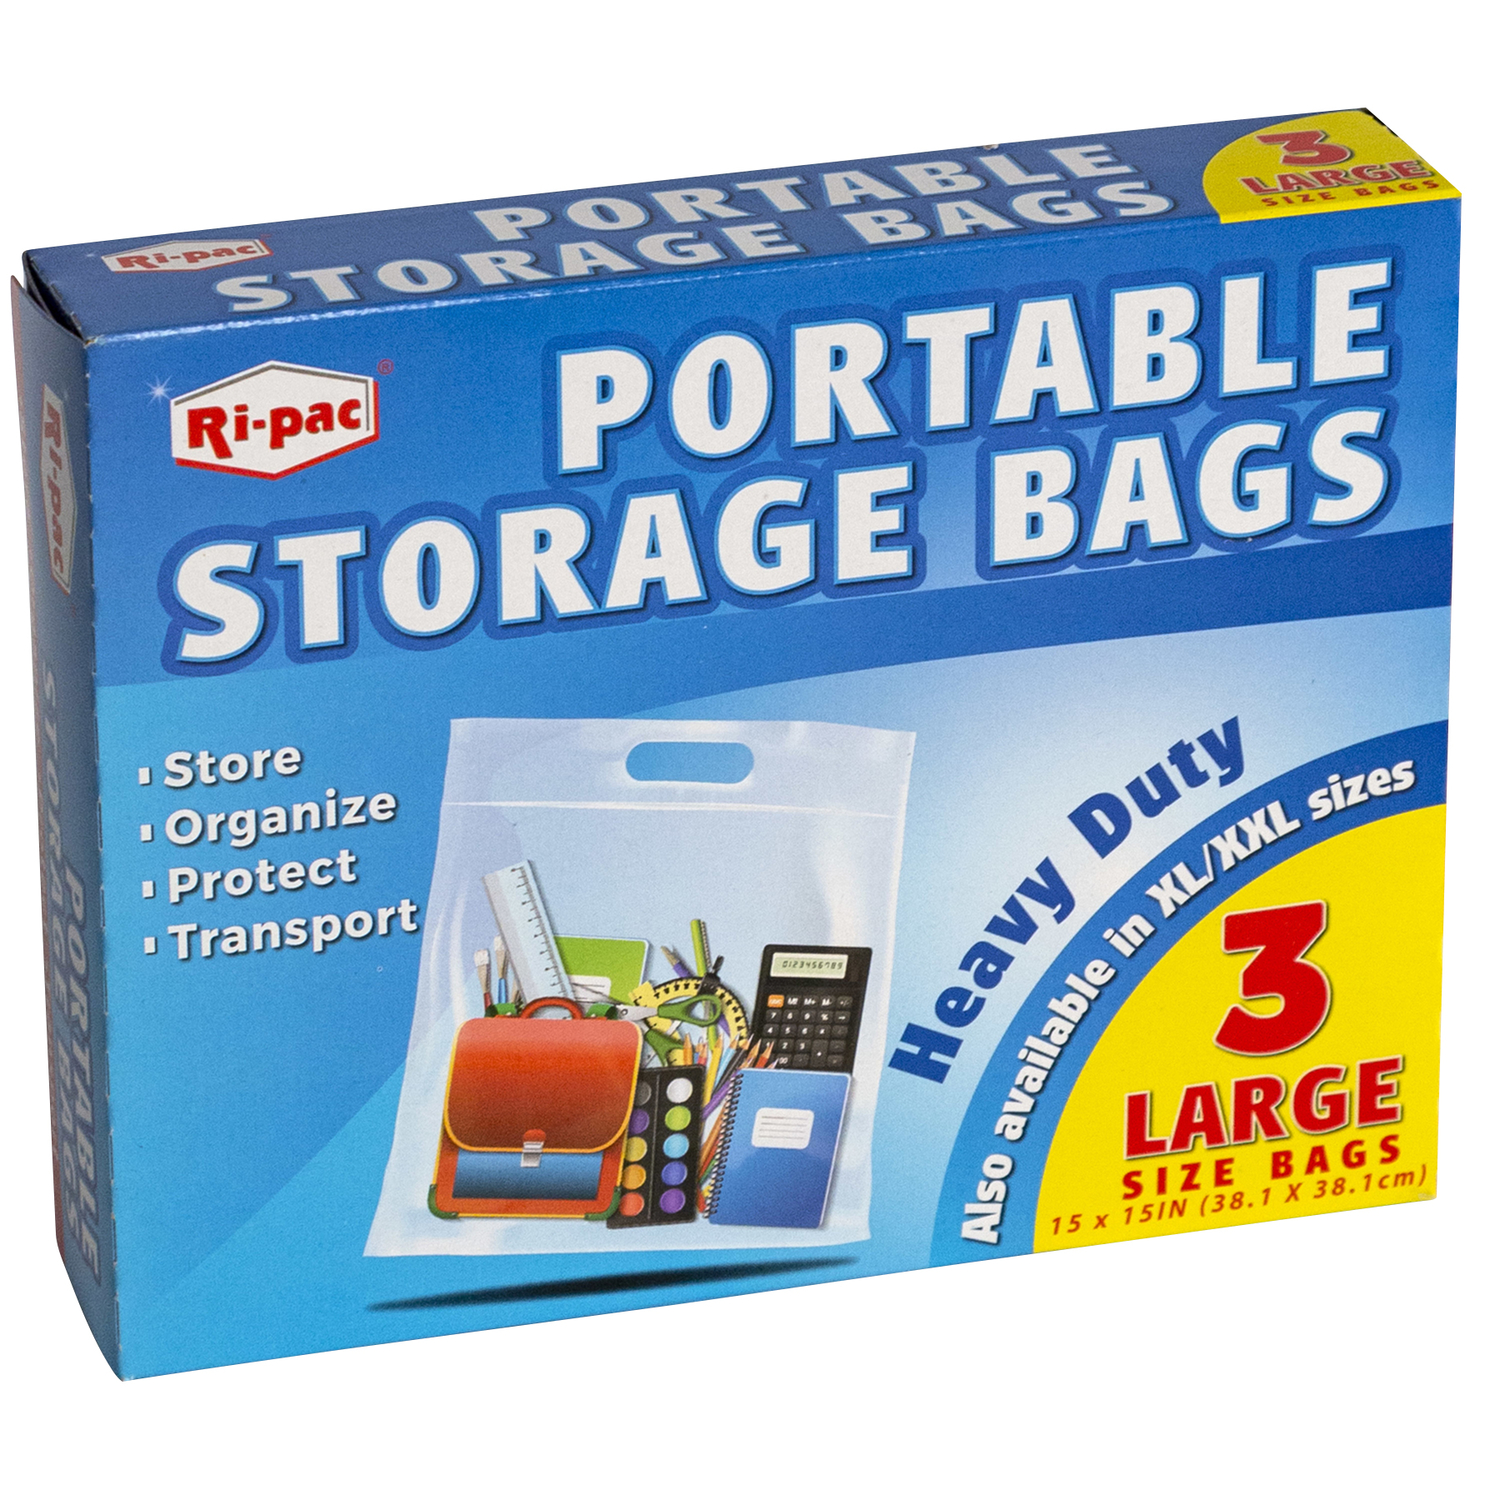 Pack of 25 Extra Large Huge Jumbo Big Slider Freezer Food Storage Bags with  Resealable Closure, Thick Big 5 Gallon Size Bags, 18 x 24